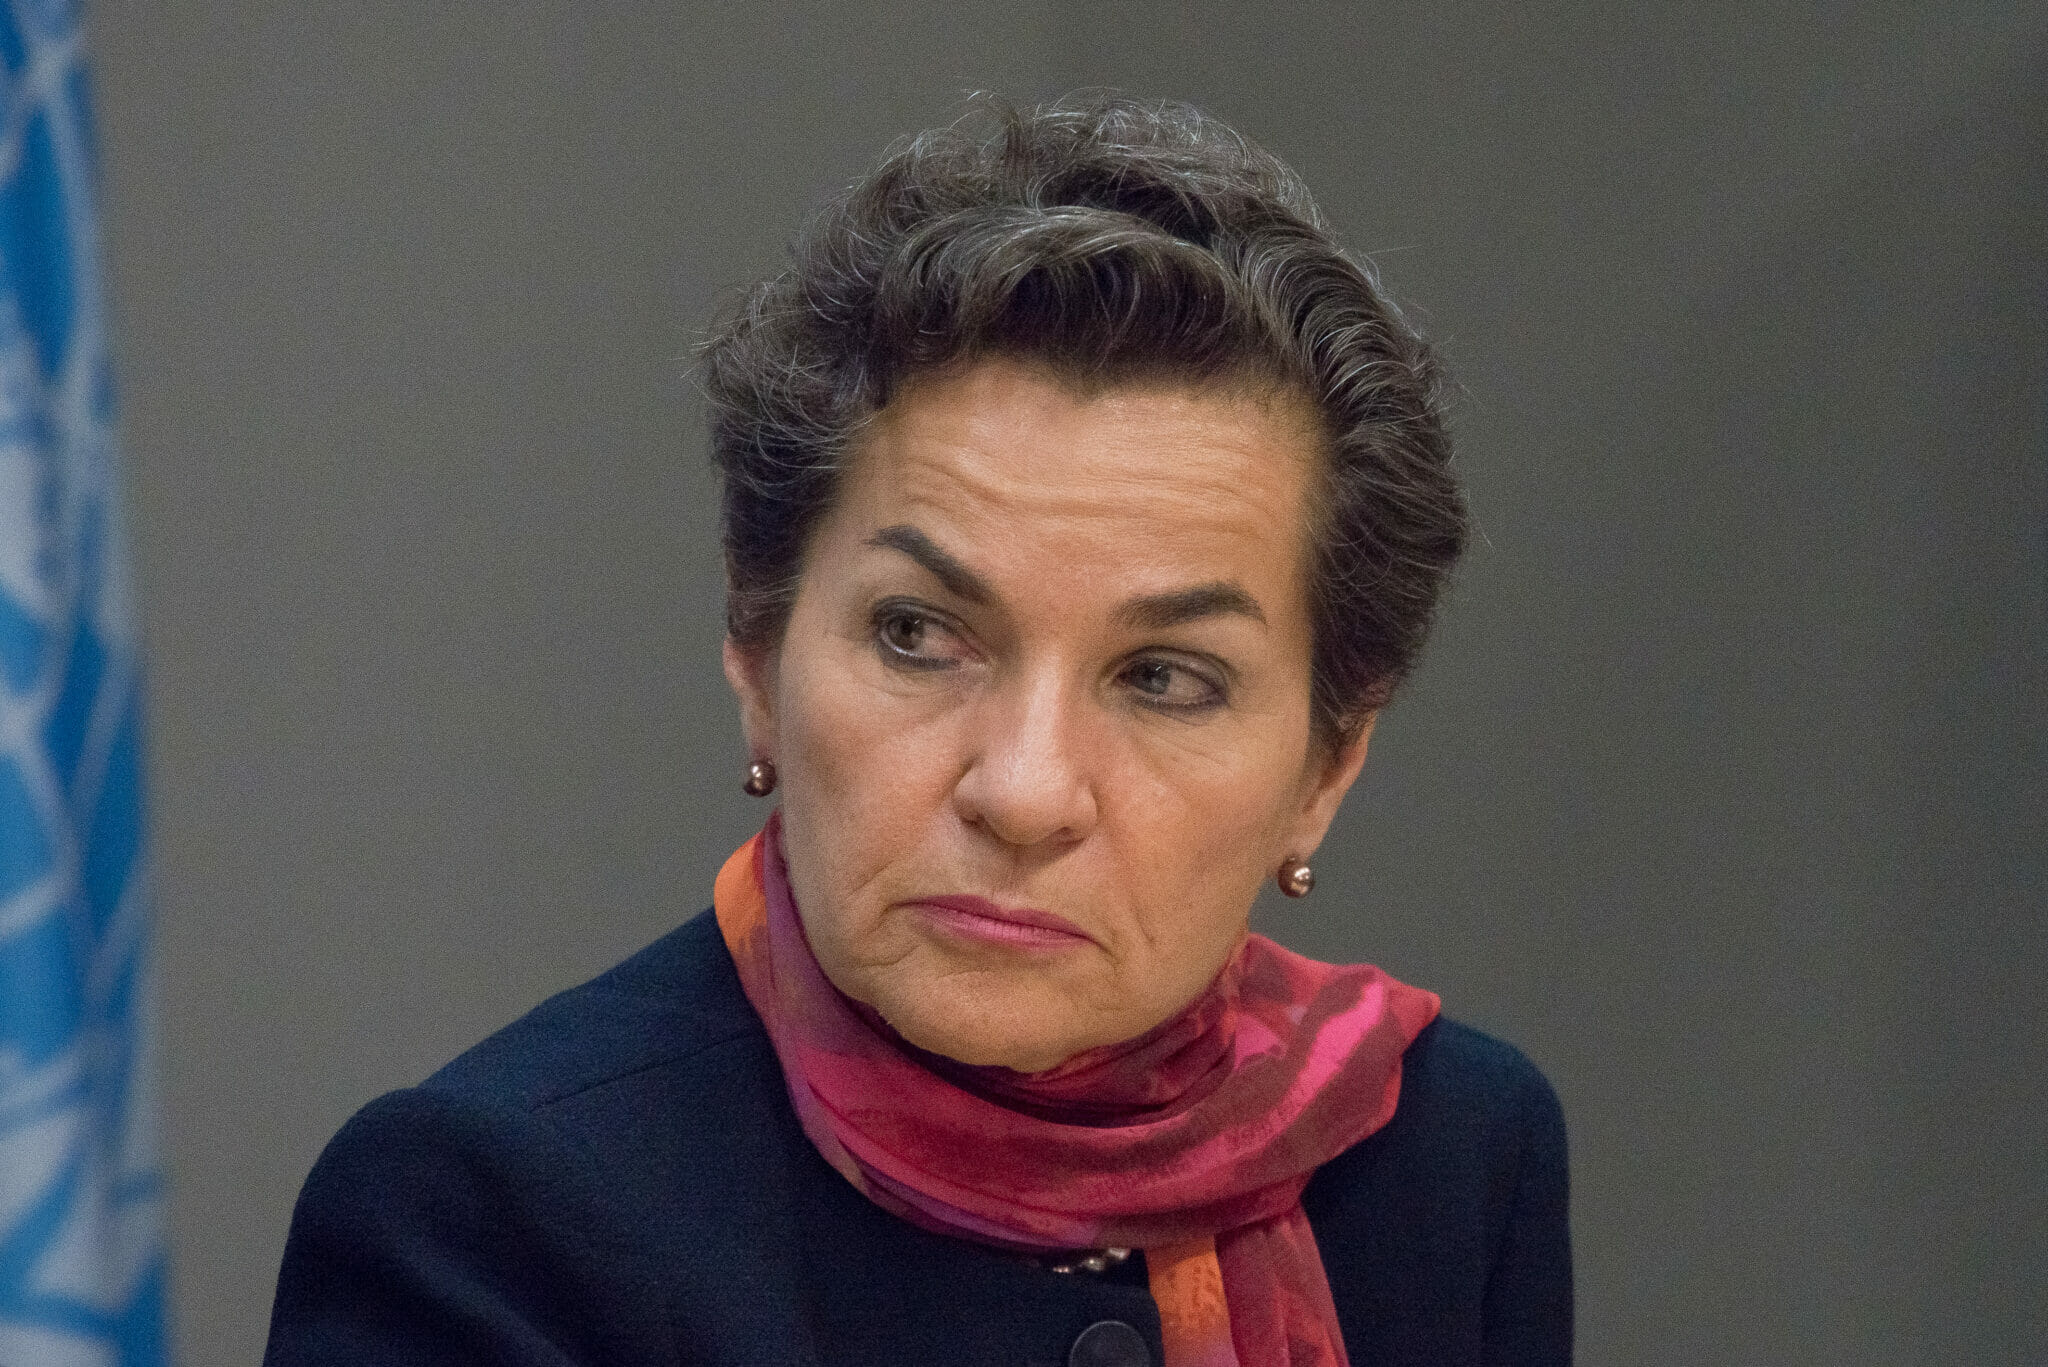 UNFCCC Executive Secretary Christiana Figueres participates in a press conference in 2016. (Photo by Albin Lohr-Jones/Pacific Press/LightRocket via Getty Images)